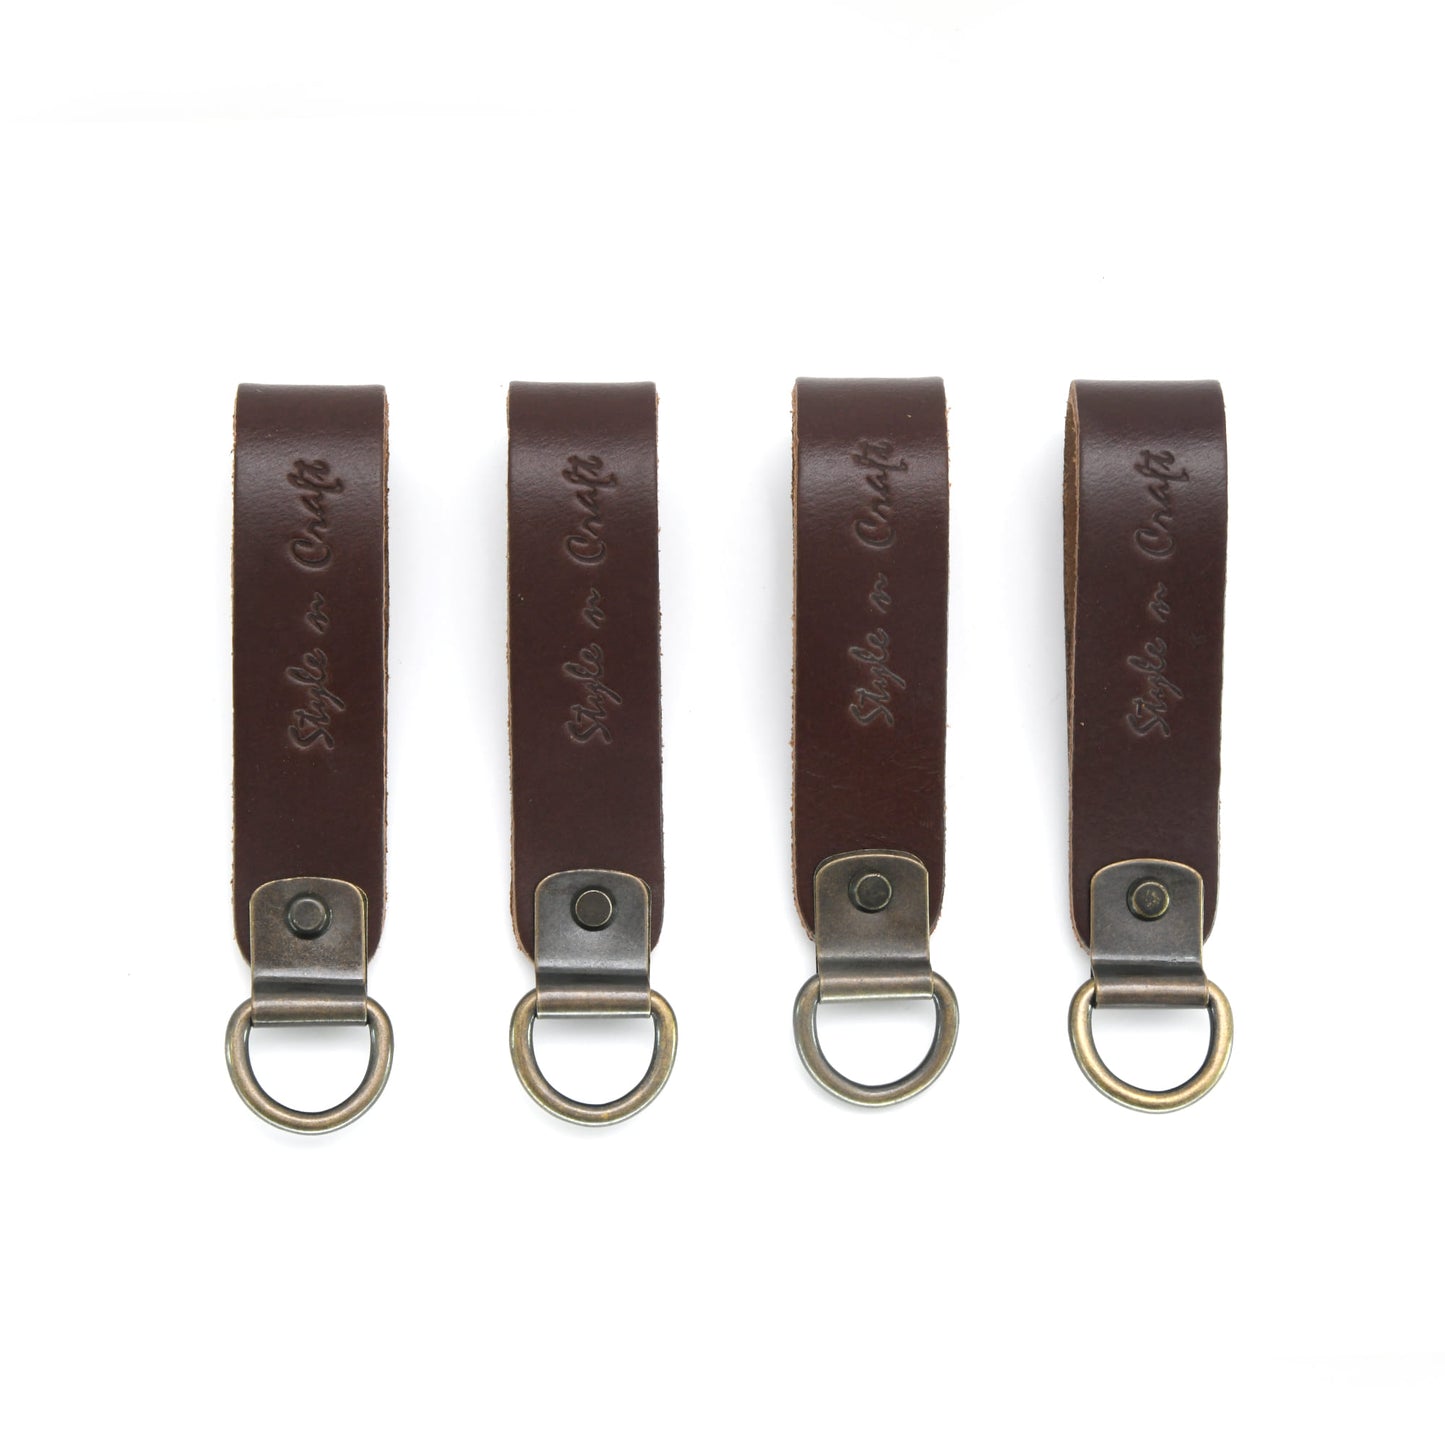 Style n Craft 98200 - Leather D-Ring Loop Set (4 Pcs) for Suspender Attachment in Dark Tan Color - Front View. Each Set Contains 4 Leather Loops attached to the D-ring with a metal plate